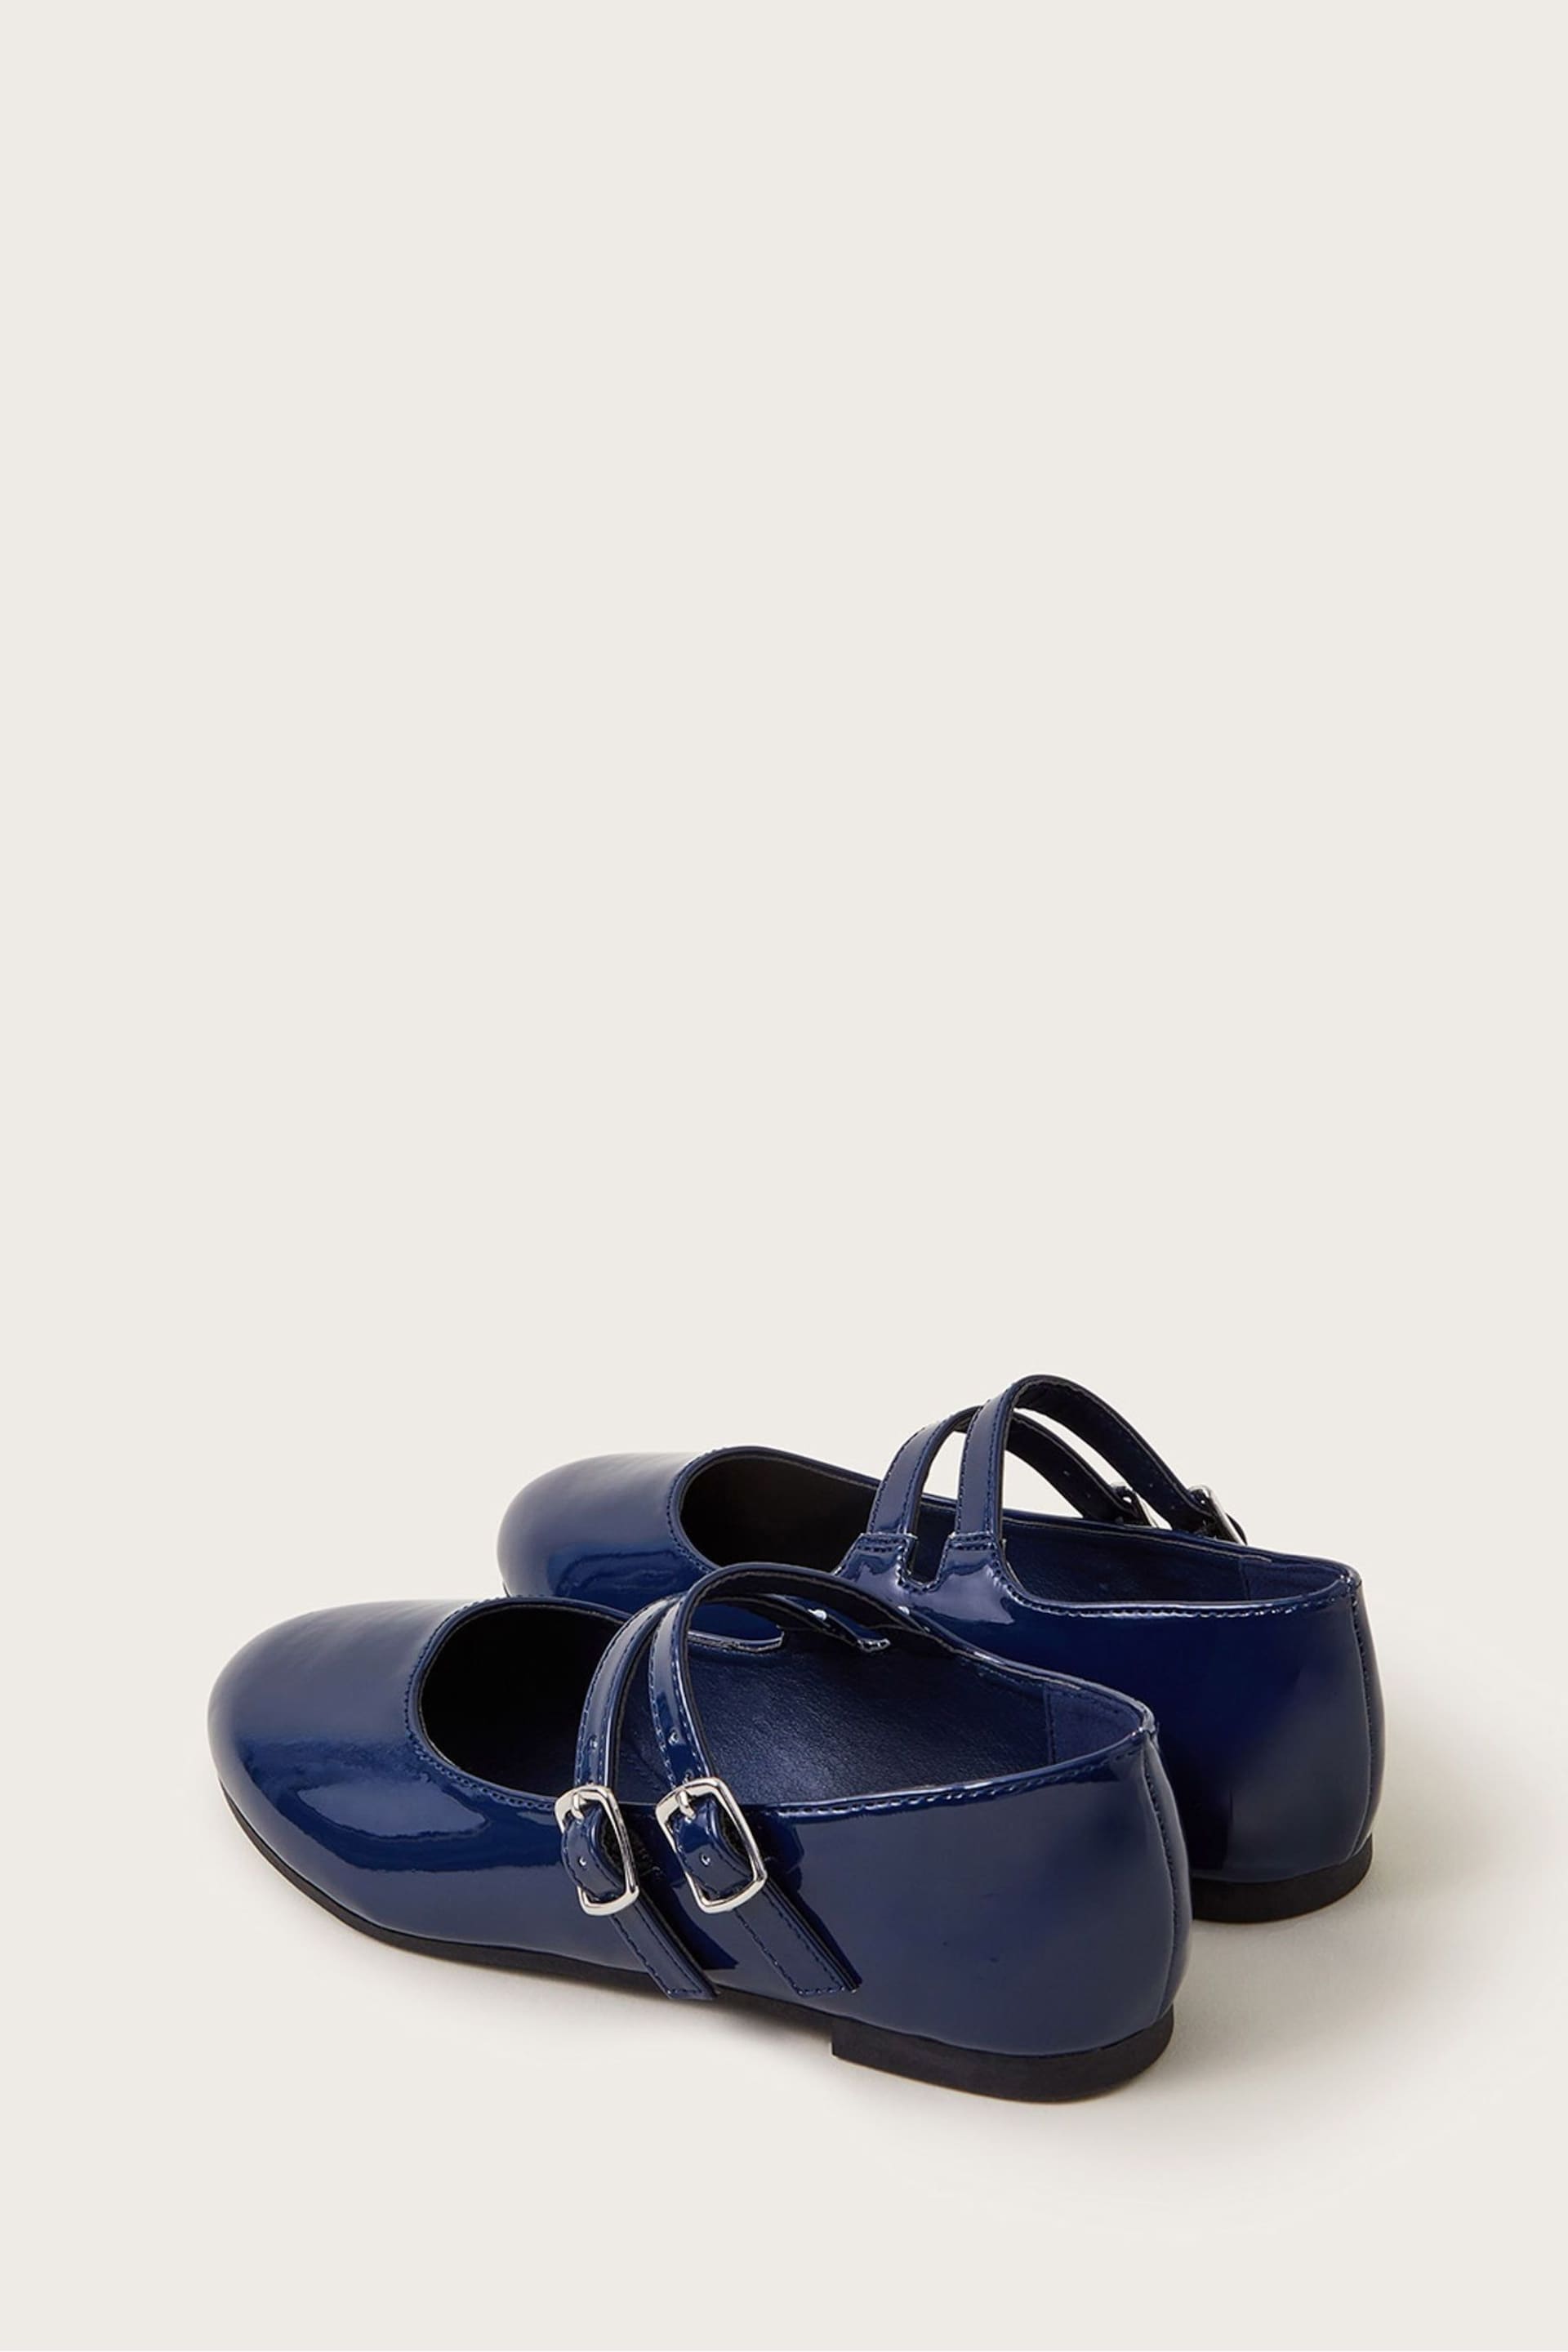 Monsoon Blue Two Strap Patent Ballet Flats - Image 2 of 3